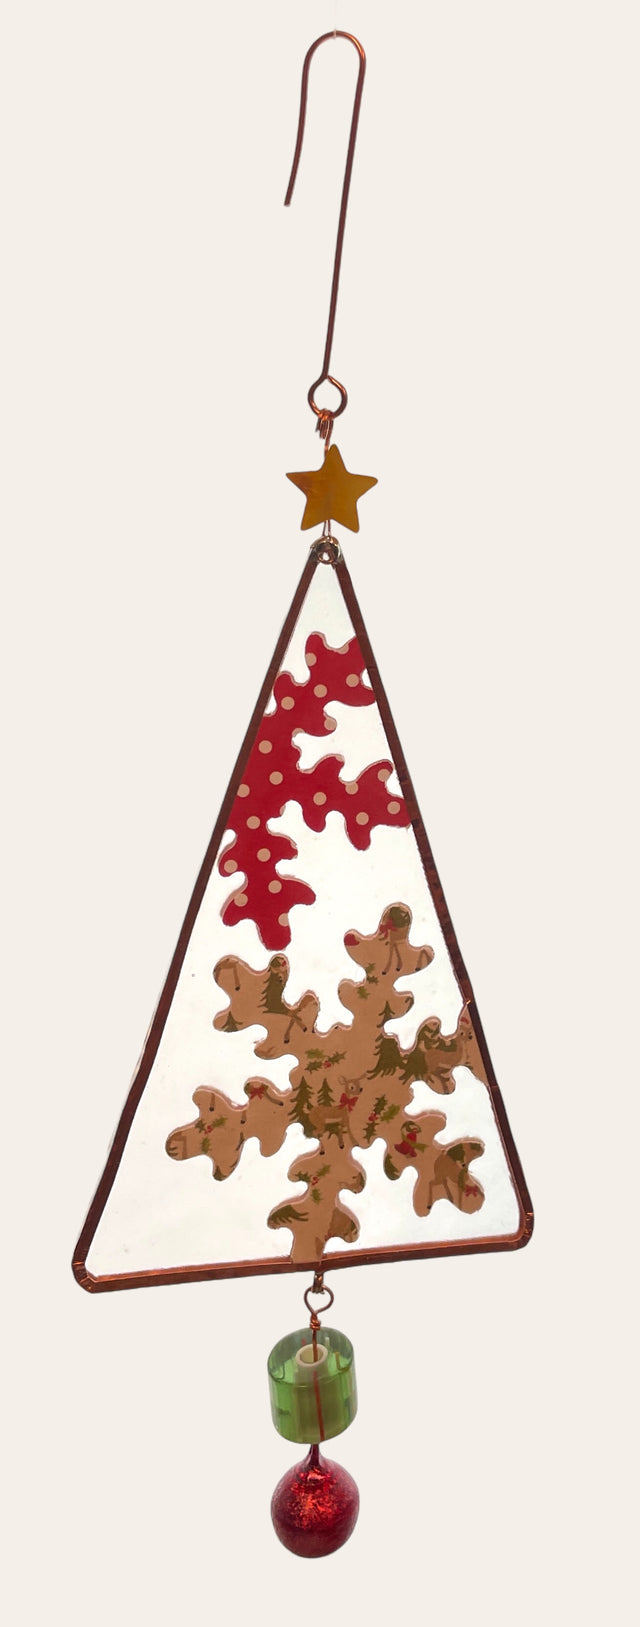 Red and Cream Tree Ornament